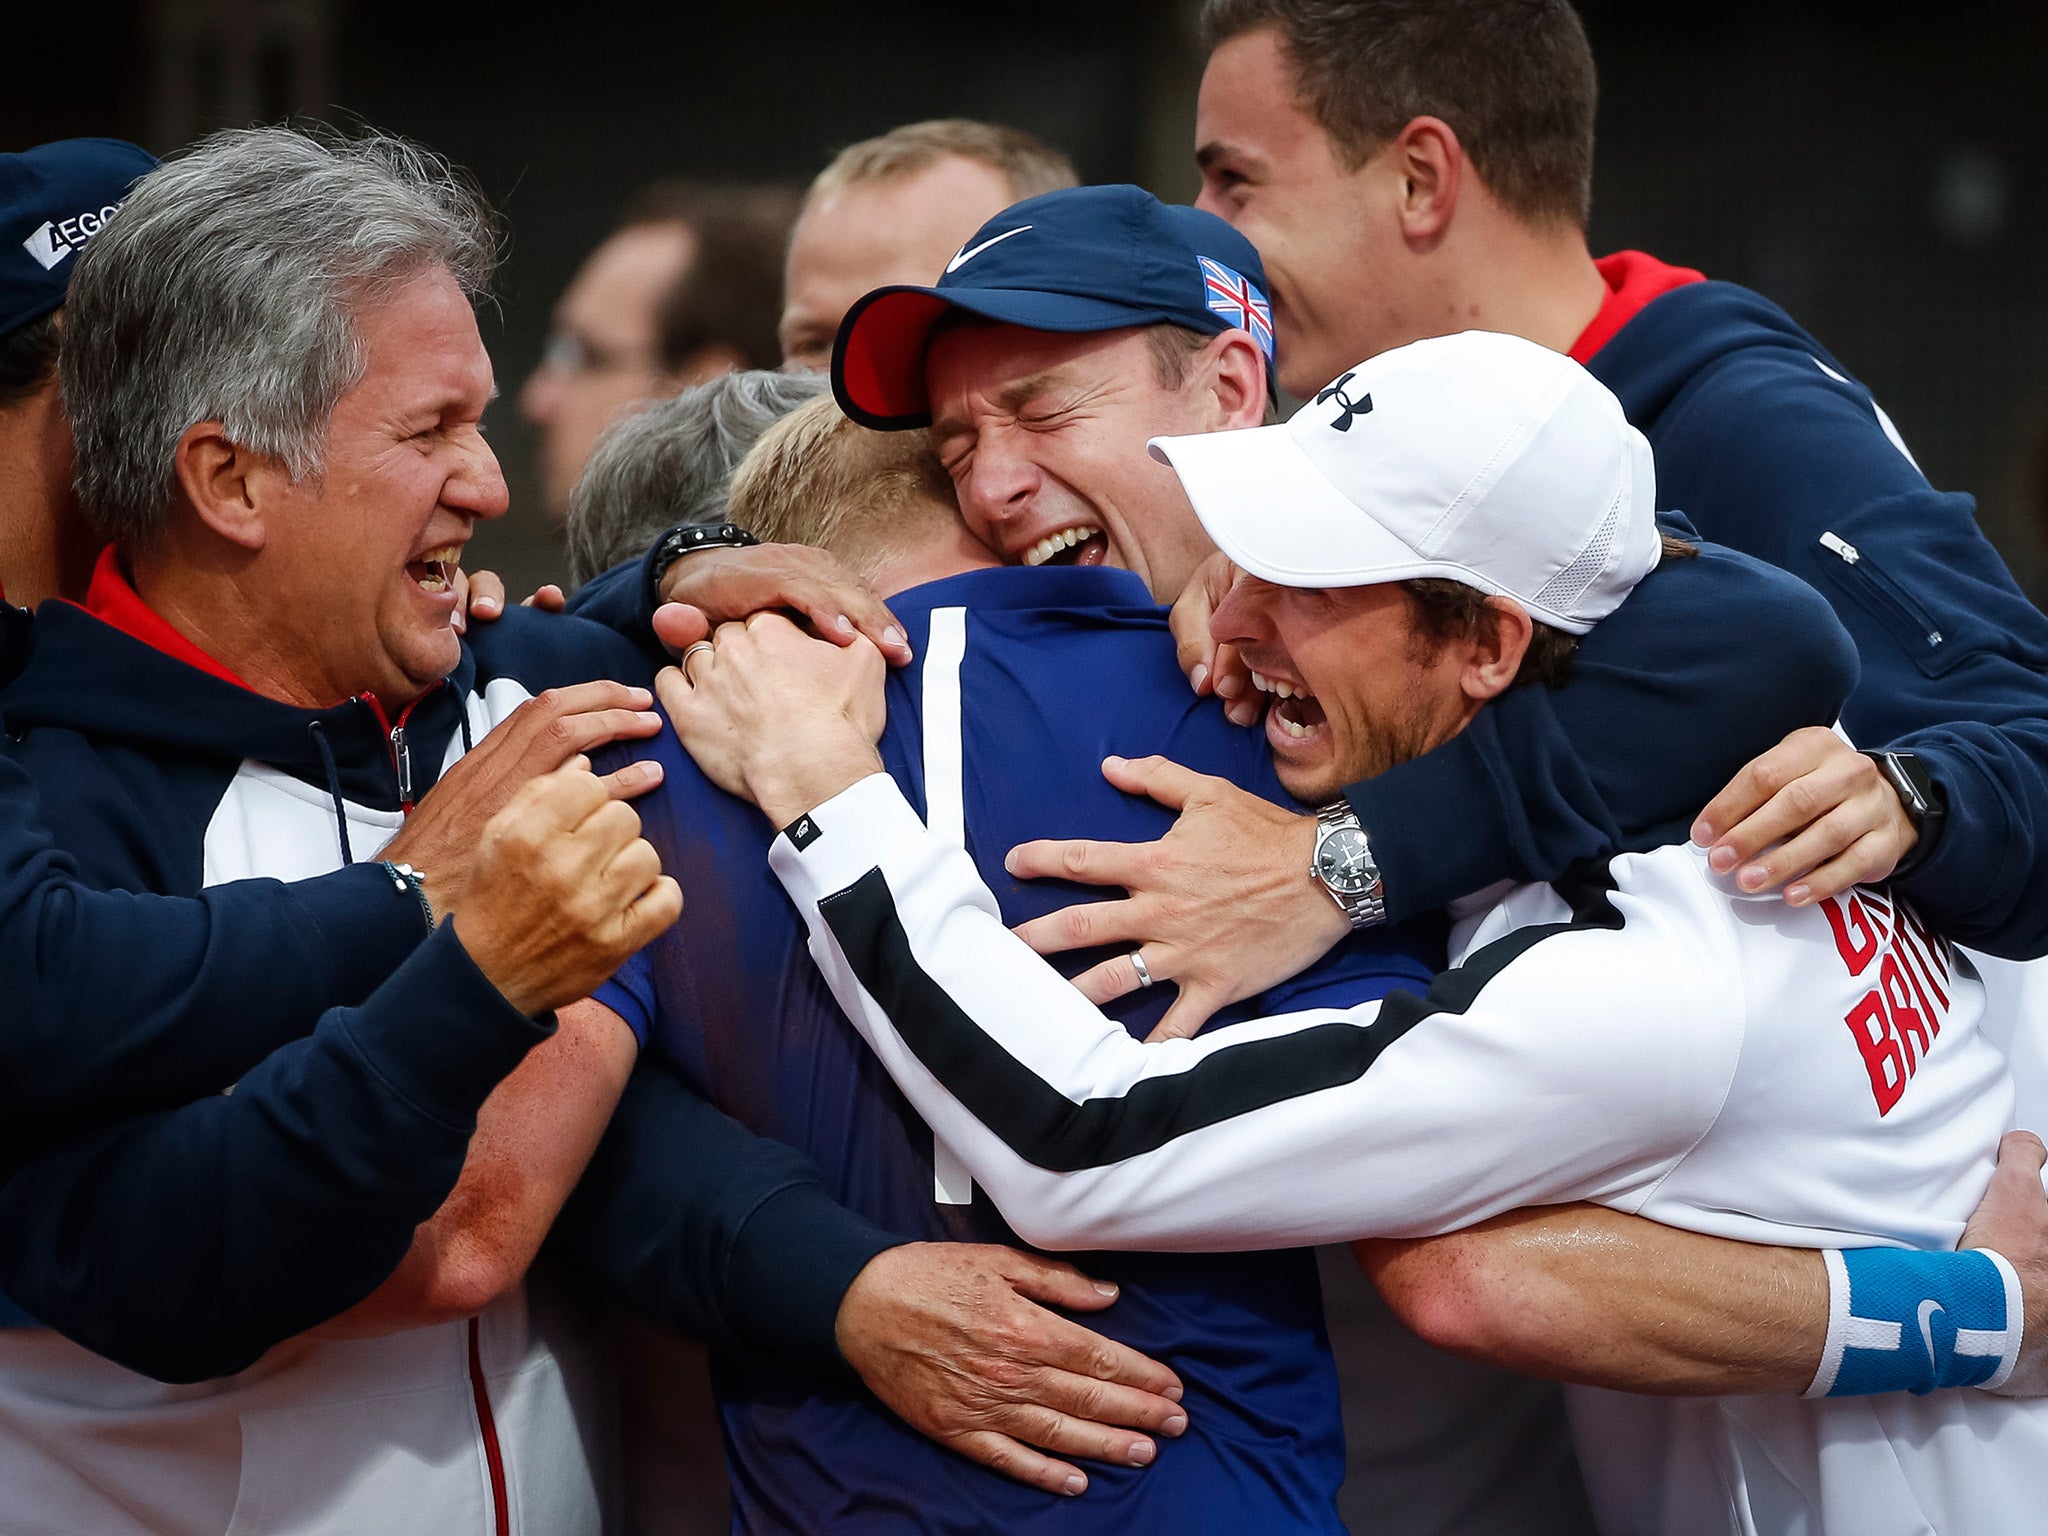 Great Britain's Davis Cup side celebrate after Kyle Edmund beats Dusan Lajovic to secure victory over Serbia